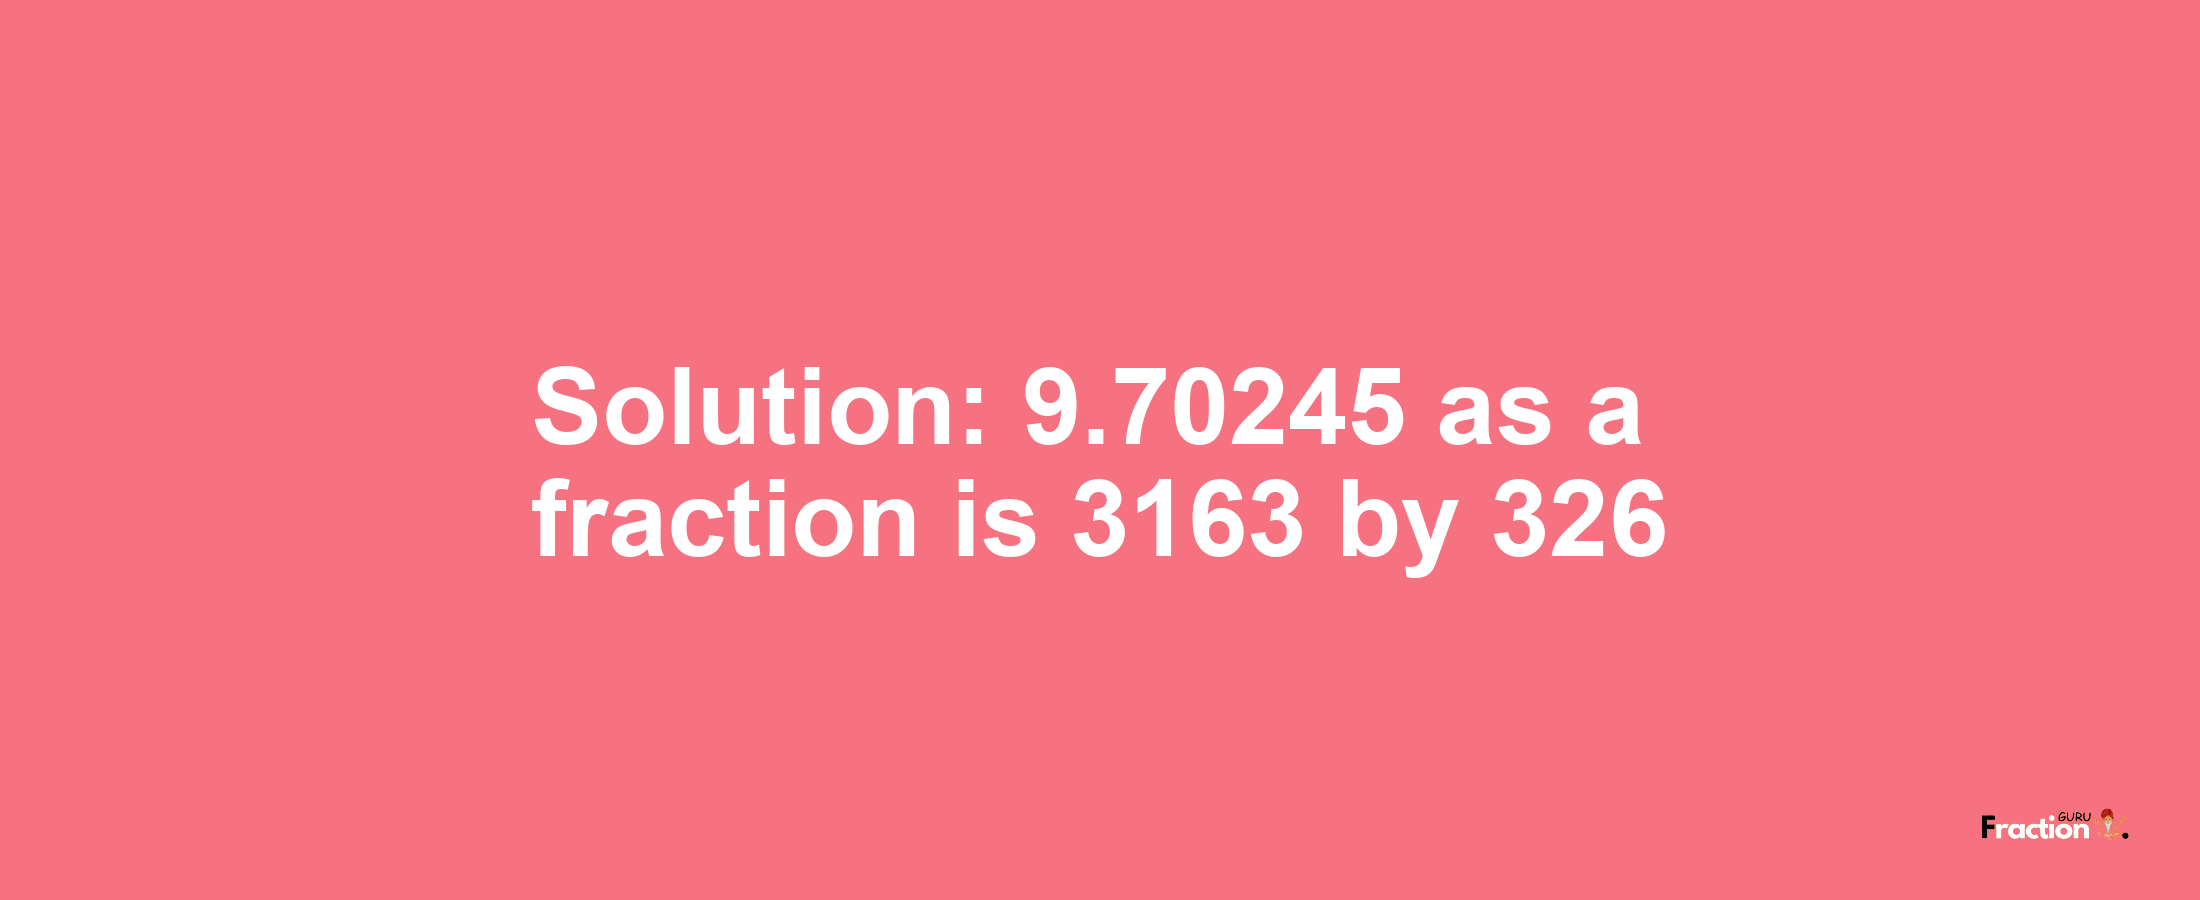 Solution:9.70245 as a fraction is 3163/326